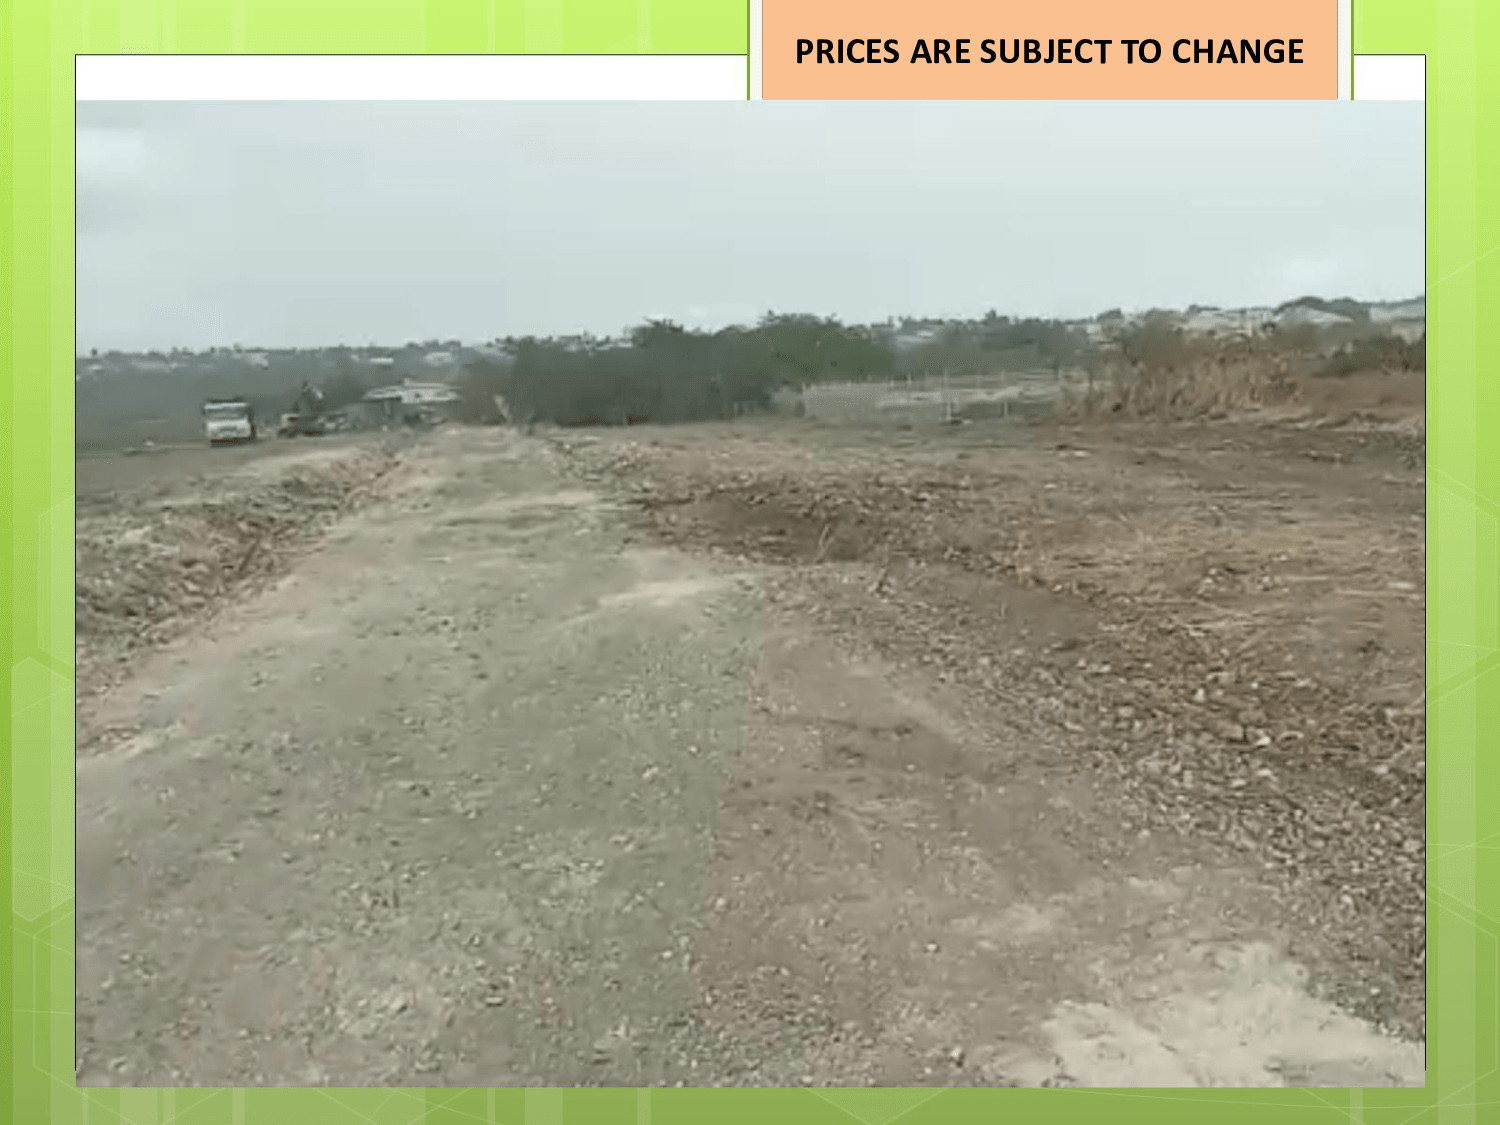 Just Real Estate One Sapphire Drive Land 3 Prices subject to change